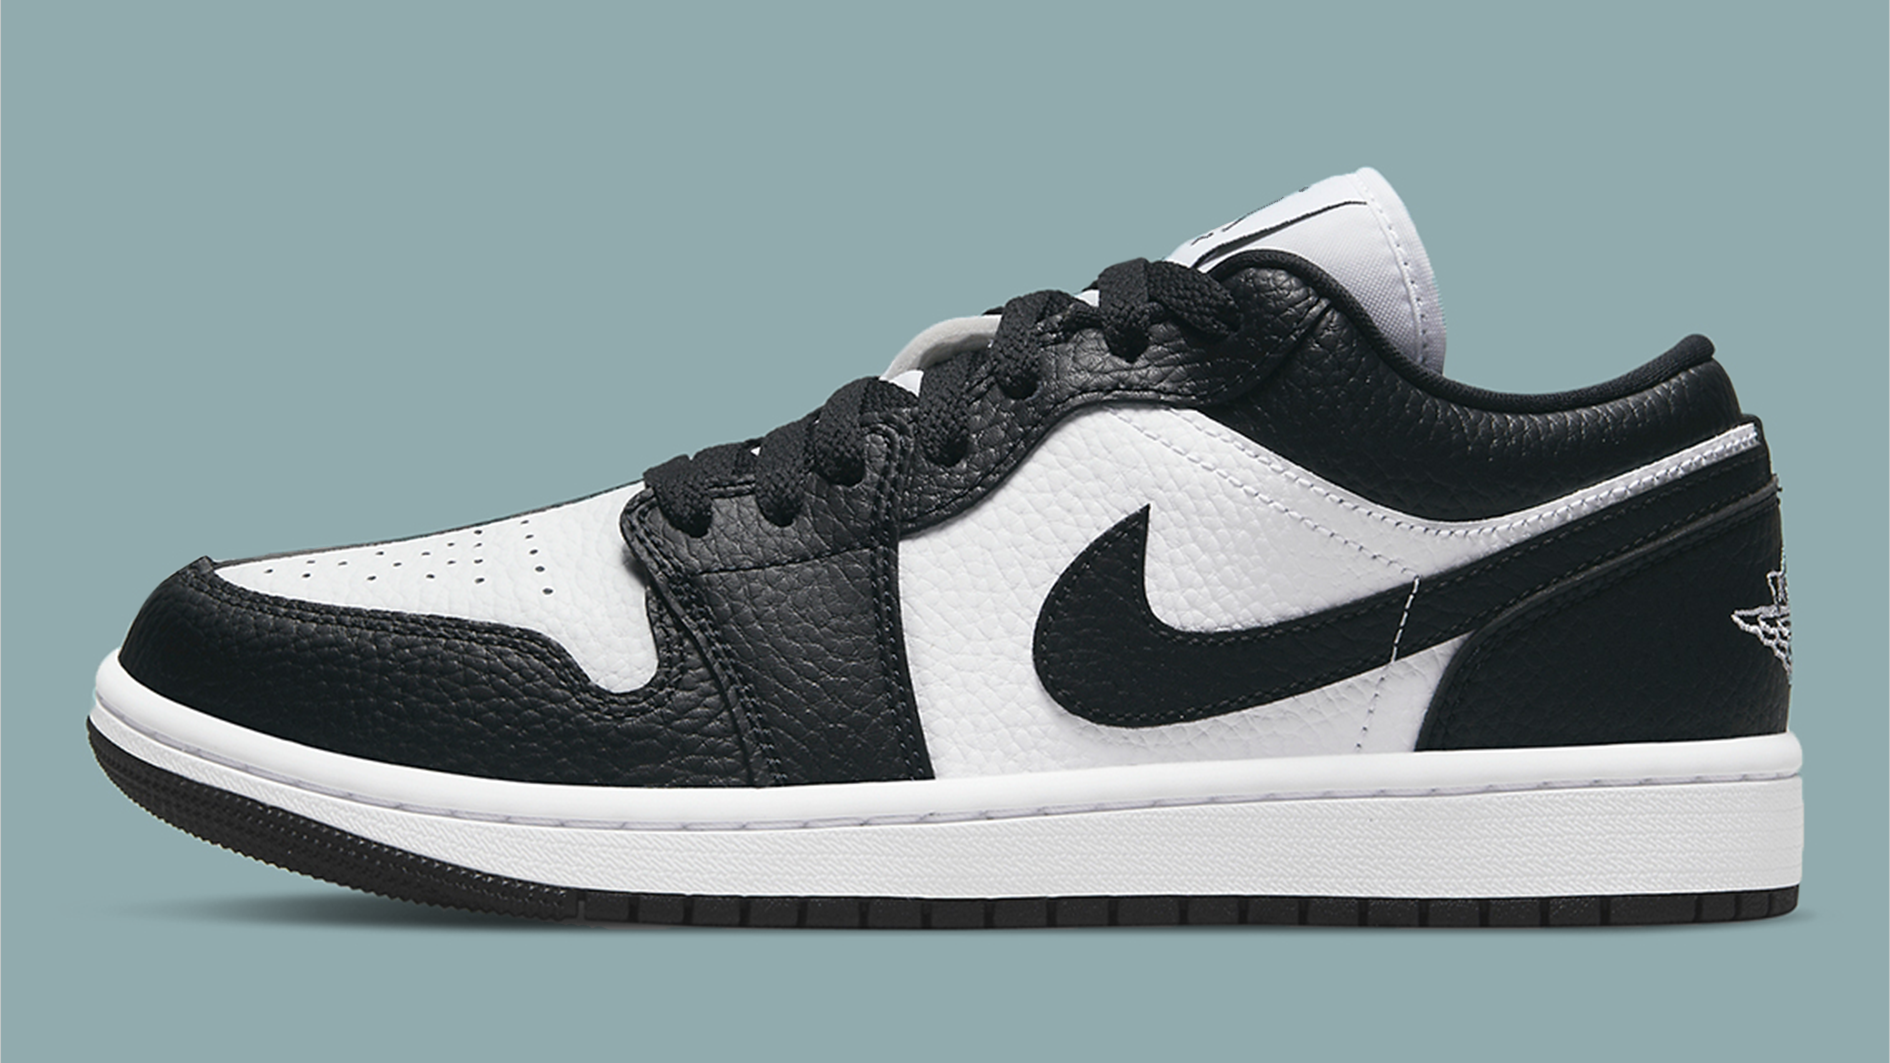 The Air Jordan 1 Gets Decorated in The "Panda" Colour Scheme The Sole